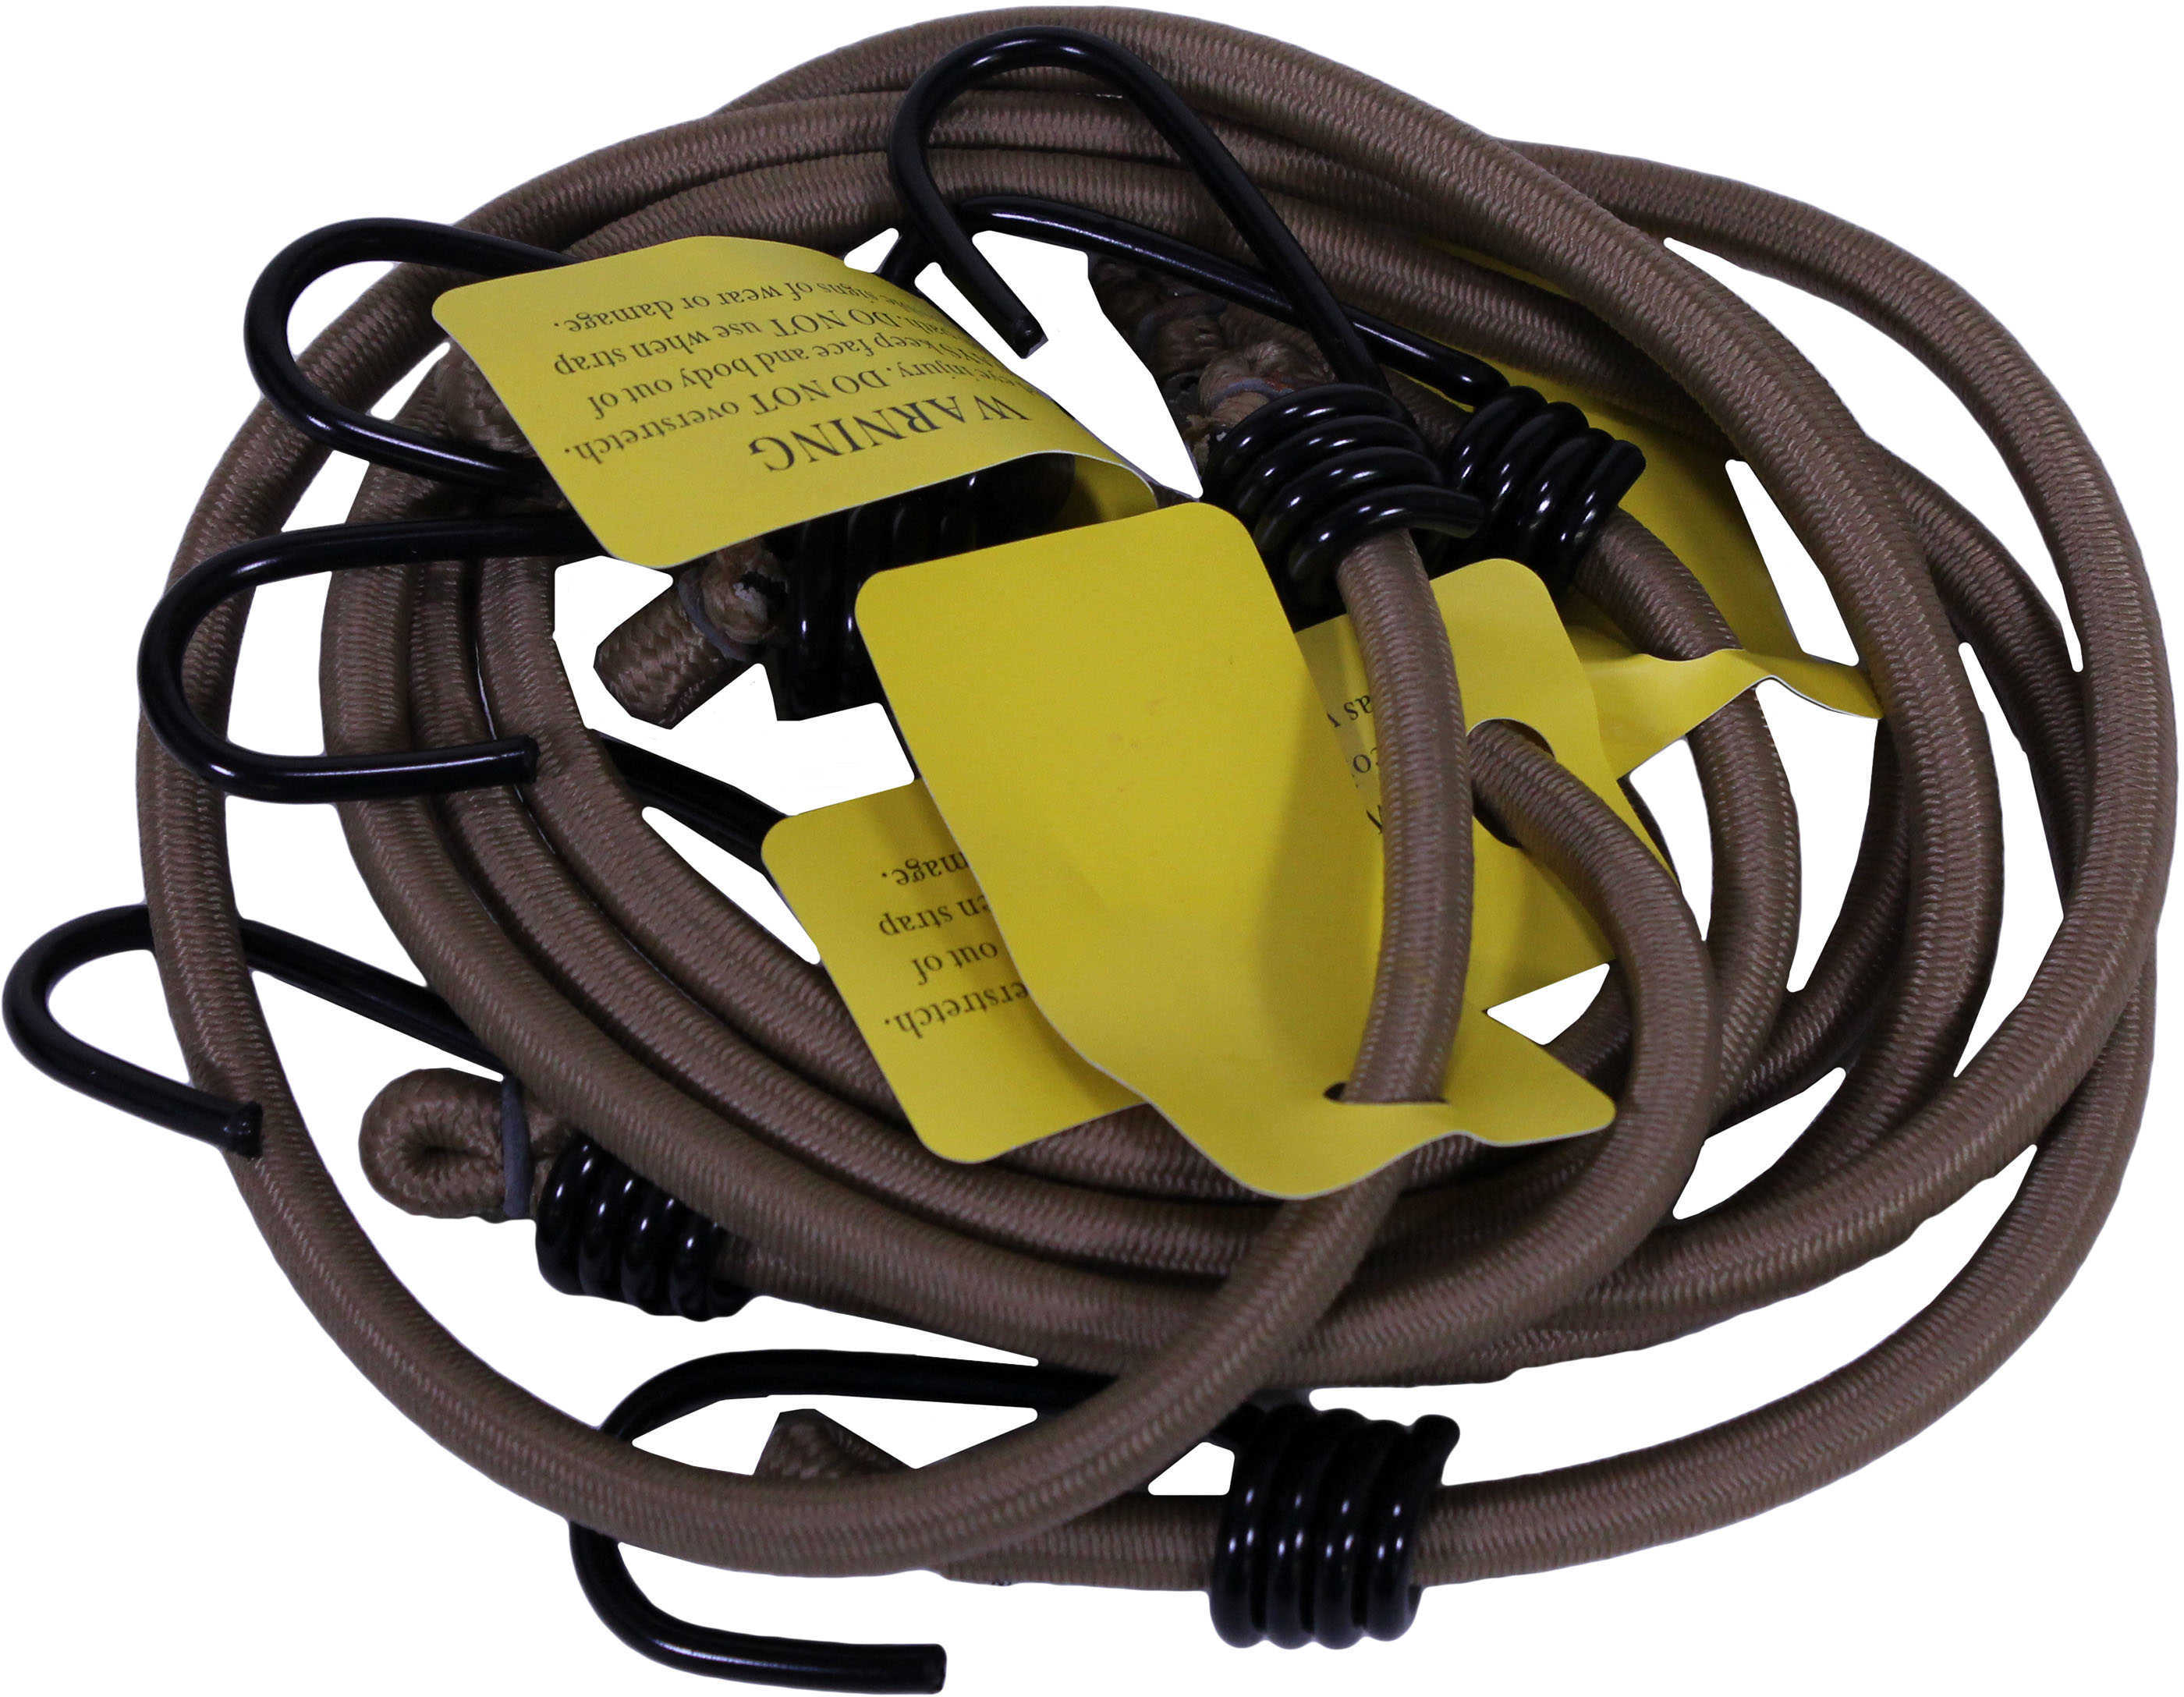 ProForce Equipment Heavy Duty Bungee Cord Tan, 4 Pack Md: 71080